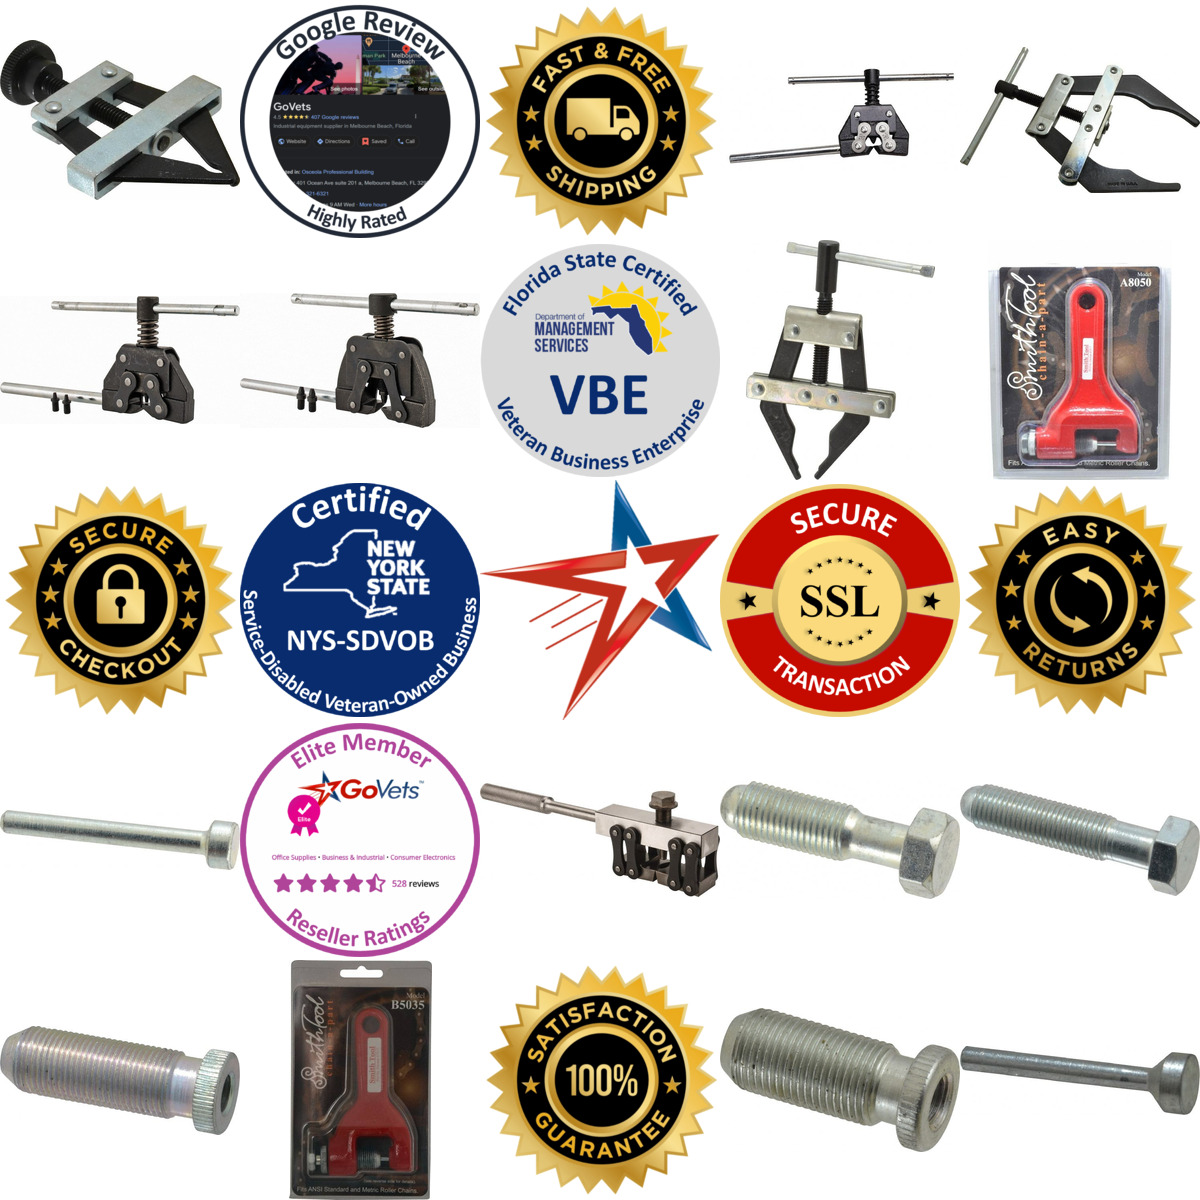 A selection of Chain Maintenance products on GoVets